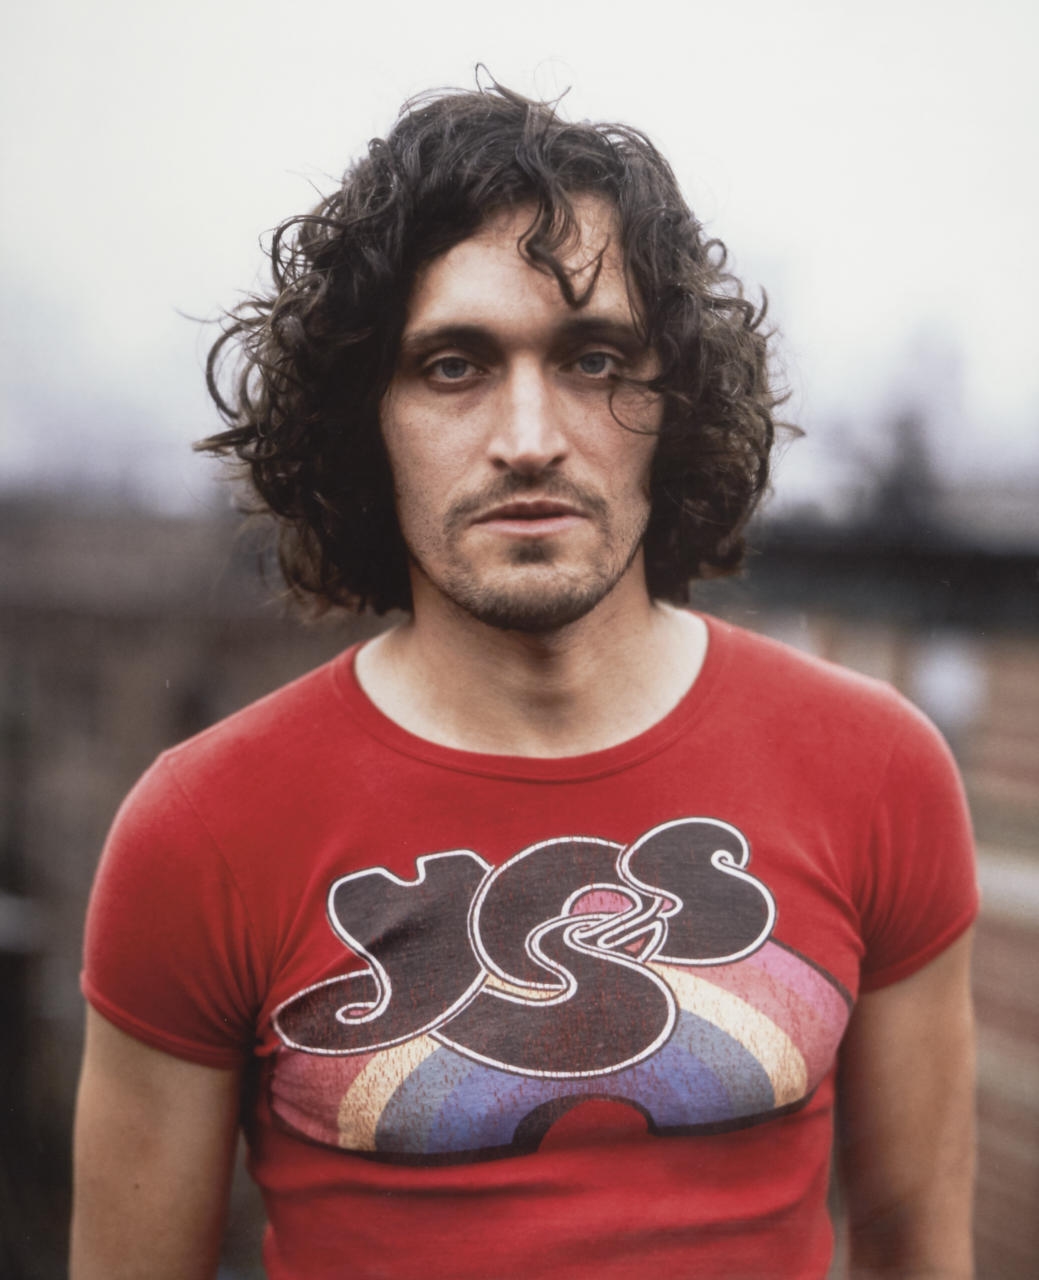 Artwork by David Armstrong, Vincent Gallo, Made of Chromogenic print